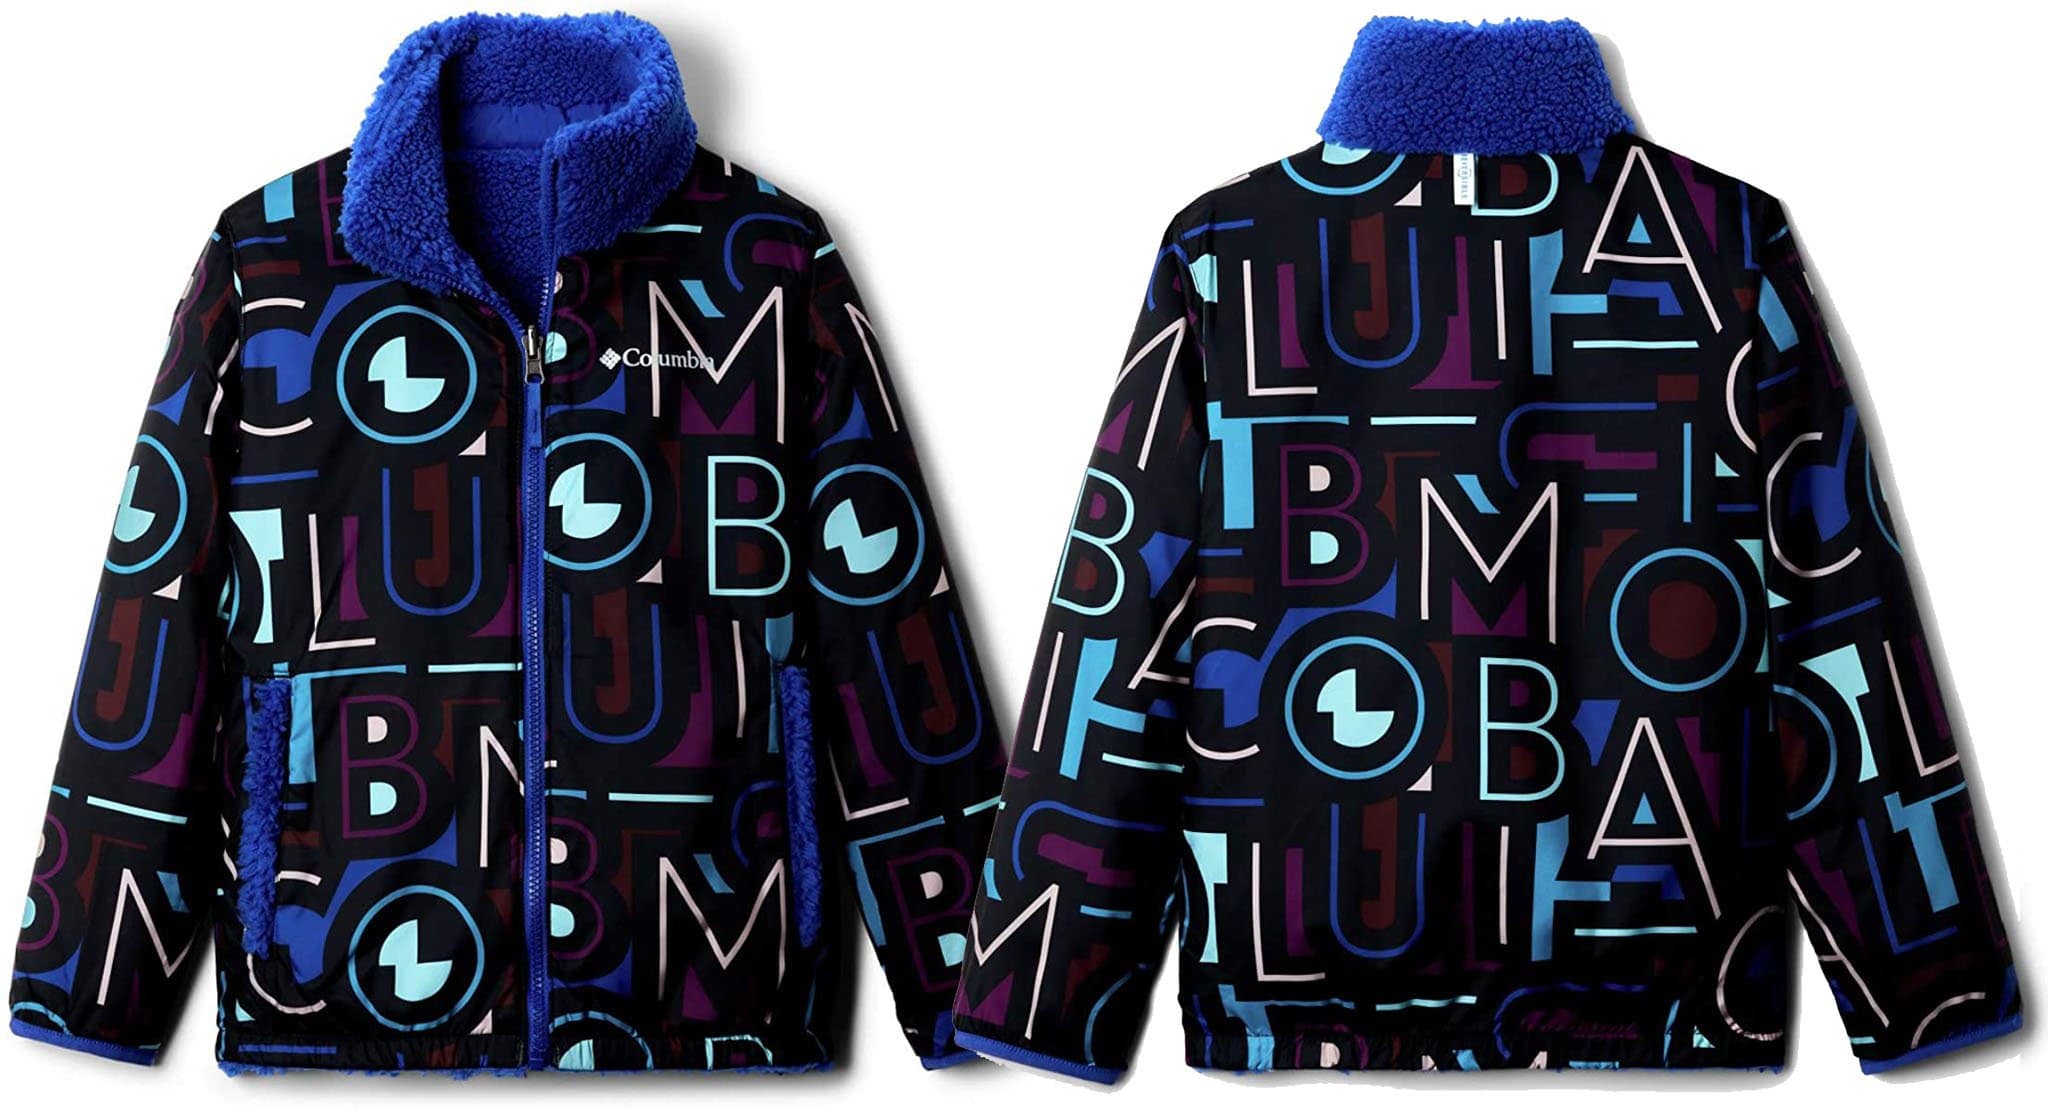 This chic two-in-one Columbia jacket for girls features cozy Sherpa with woven overlays on one side and a durable windbreaker with a printed Columbia design on the other